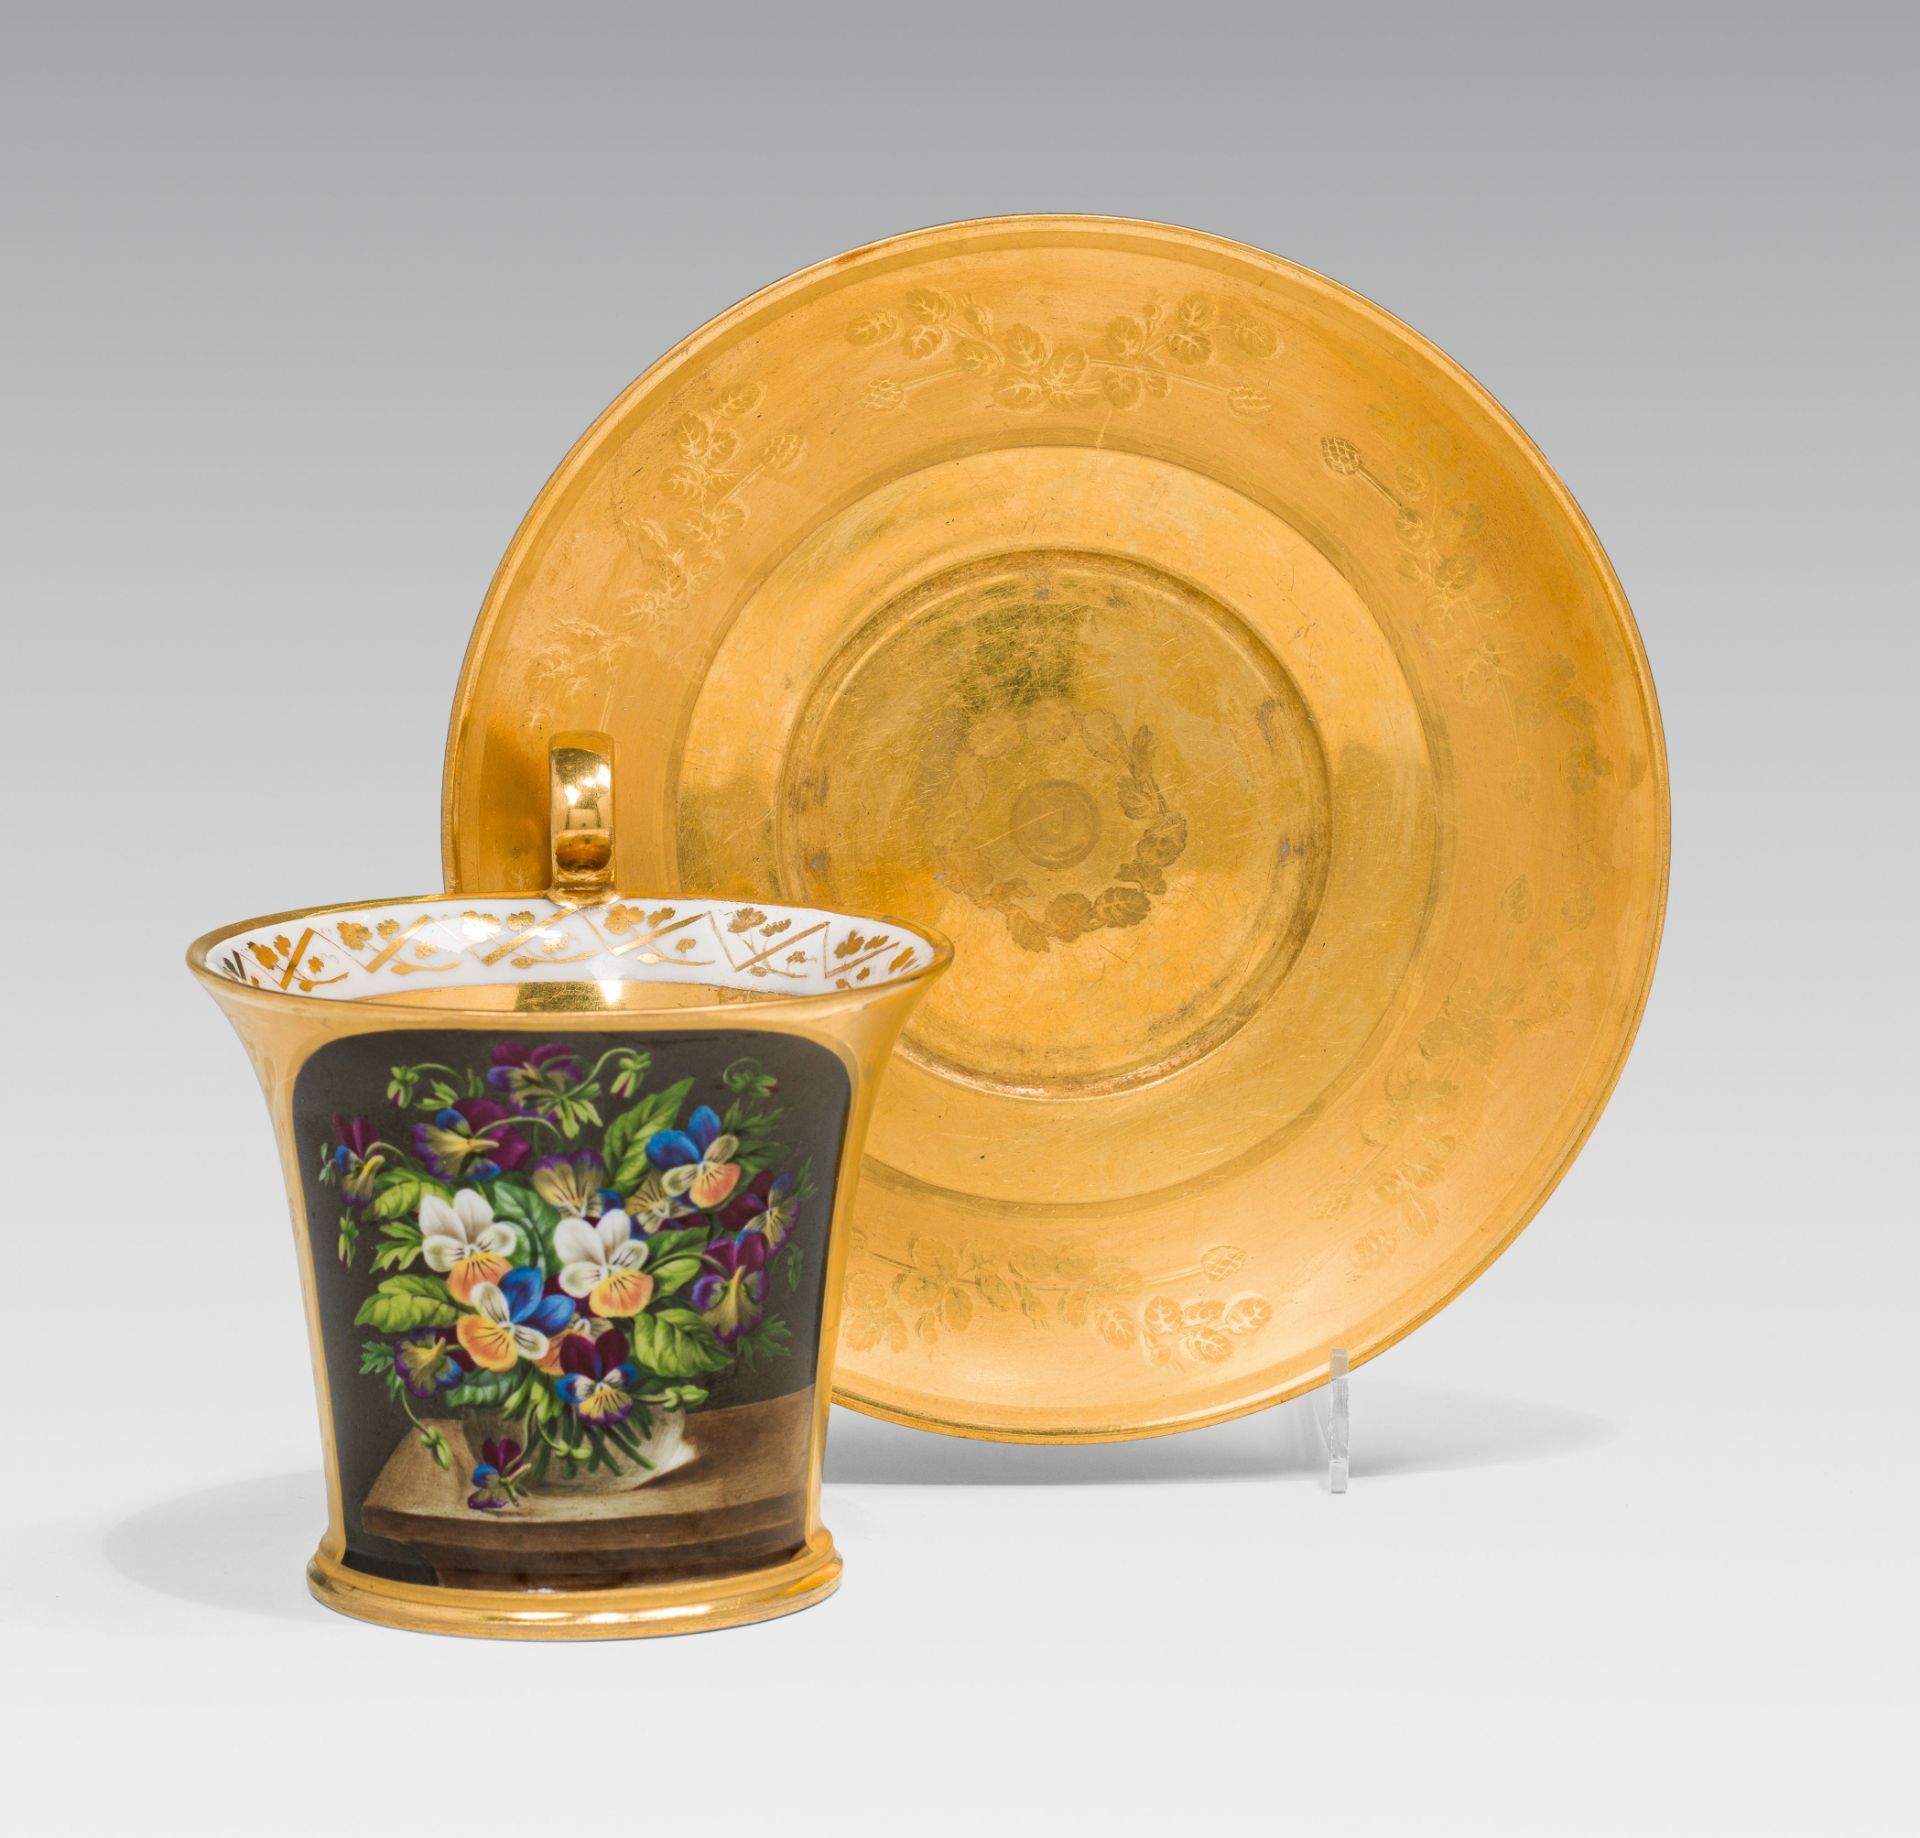 Anton Kothgasser: Cup with inlaid glass and saucer